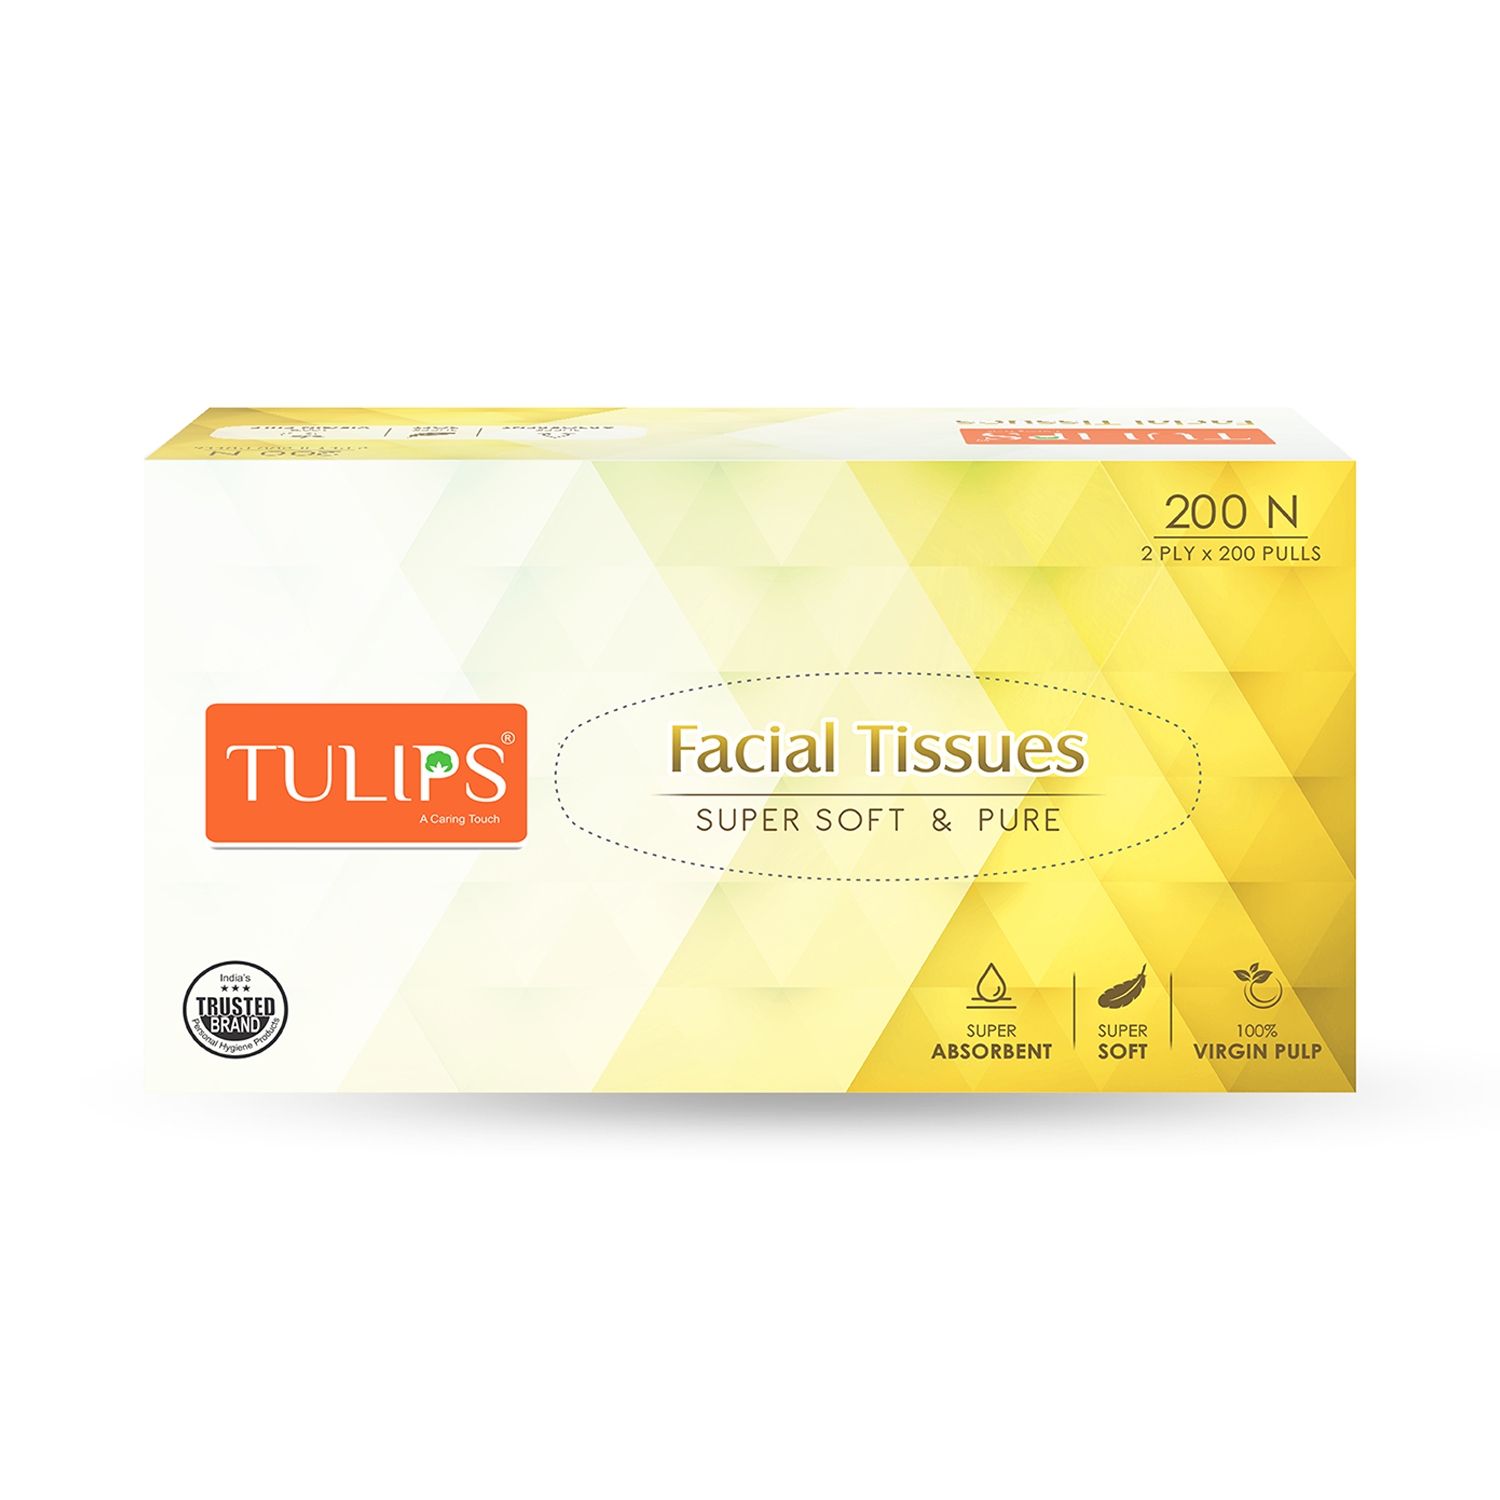 Tulips Facial Tissues (2 Ply x 200 Pulls)